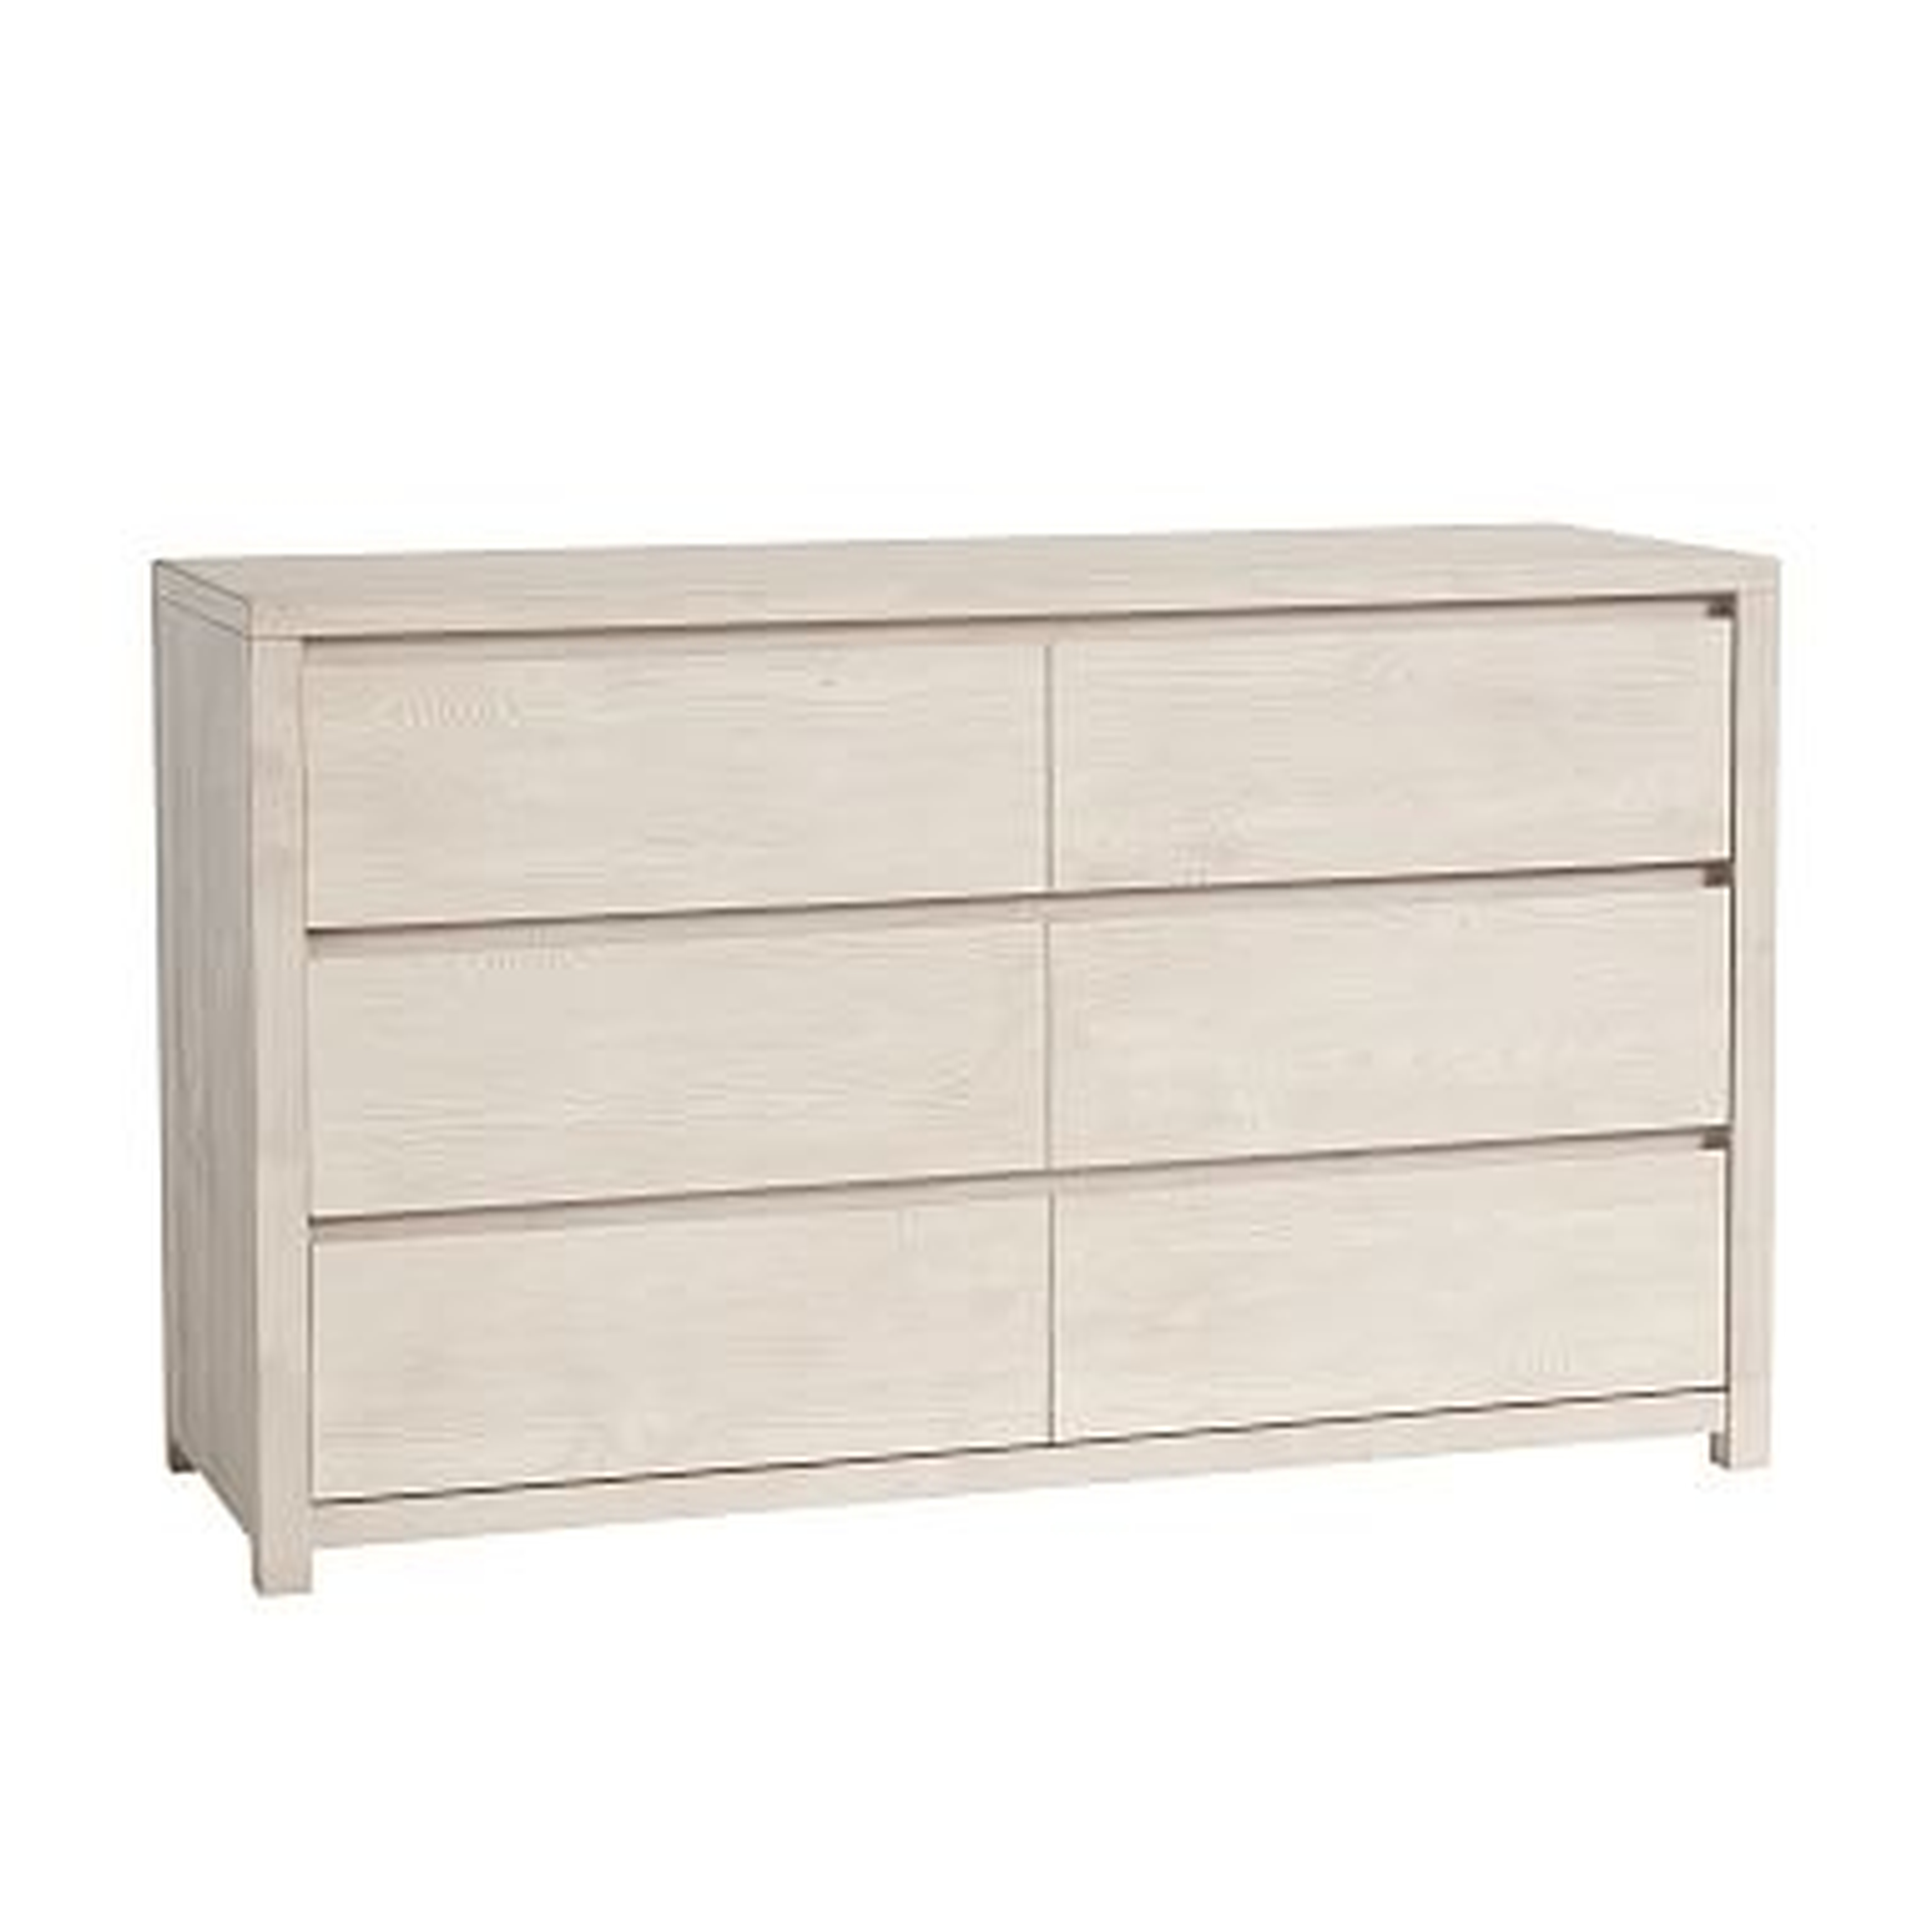 Costa 6-Drawer Wide Dresser, Weathered White - Pottery Barn Teen